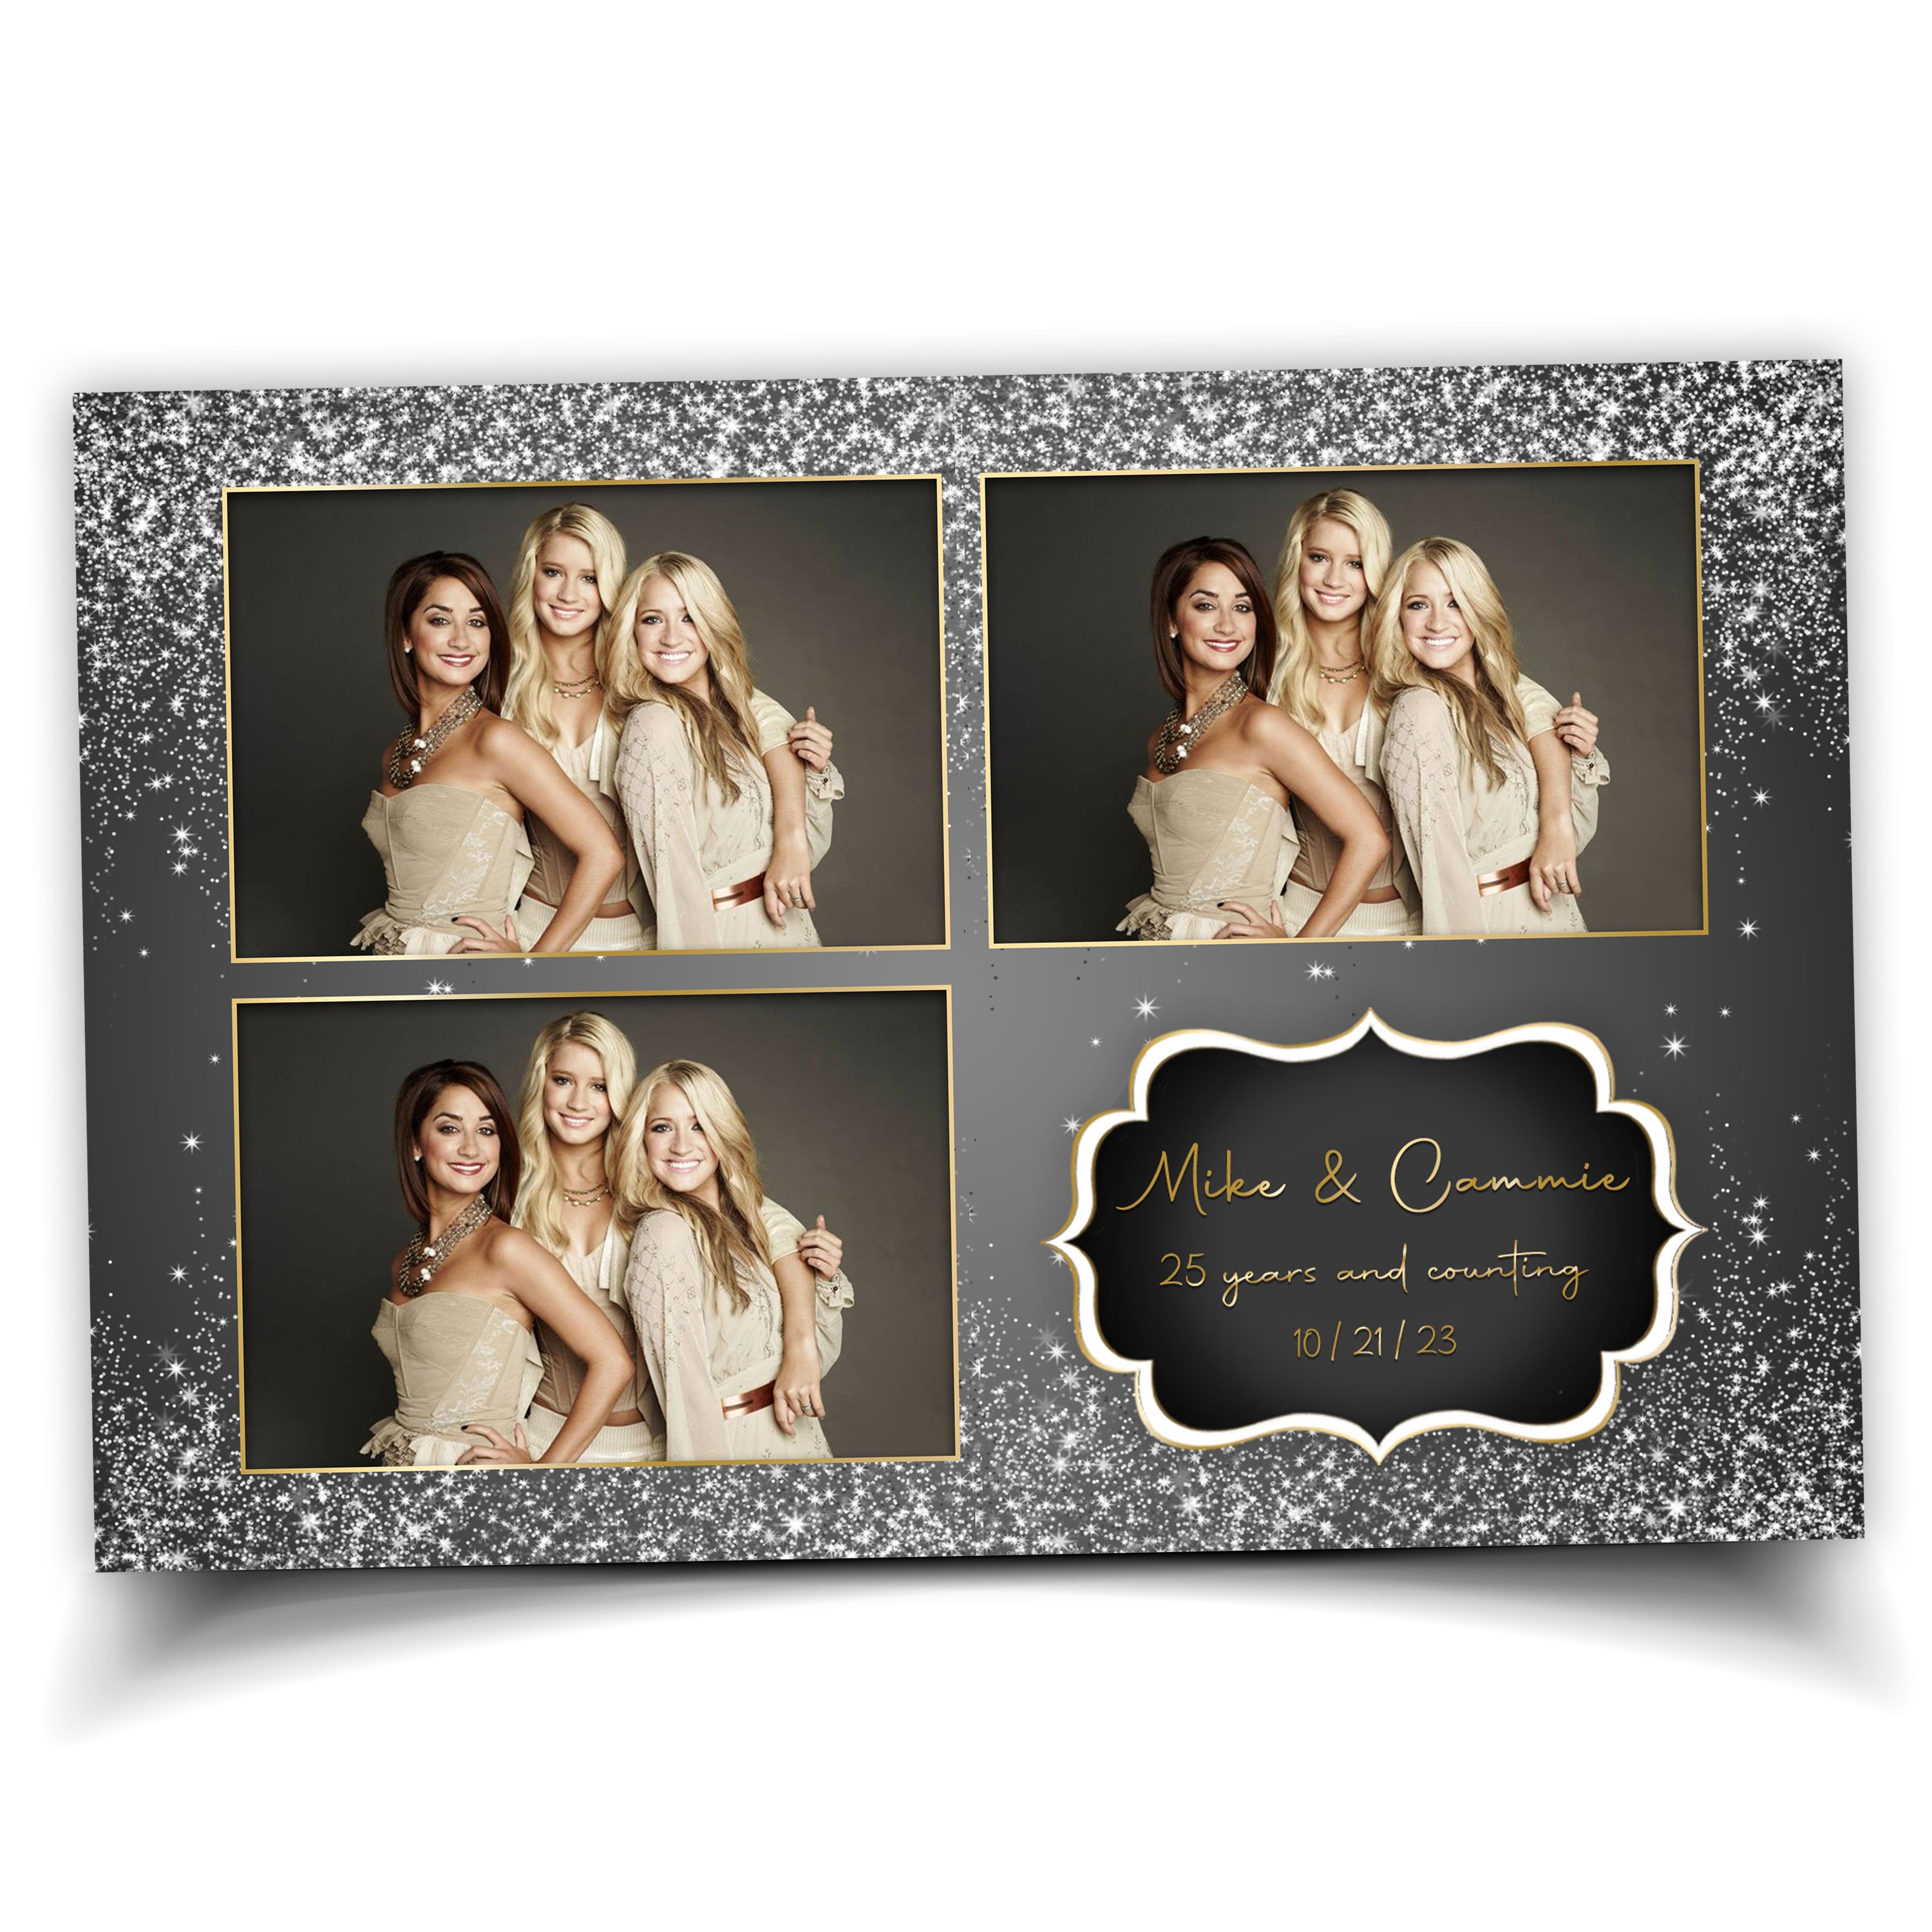 Super Ornate Silver Frames  2×6 inch Wedding & Special Event Photo Booth,  Photo Strip Template Layout - ProStarra Photo Booth Designs